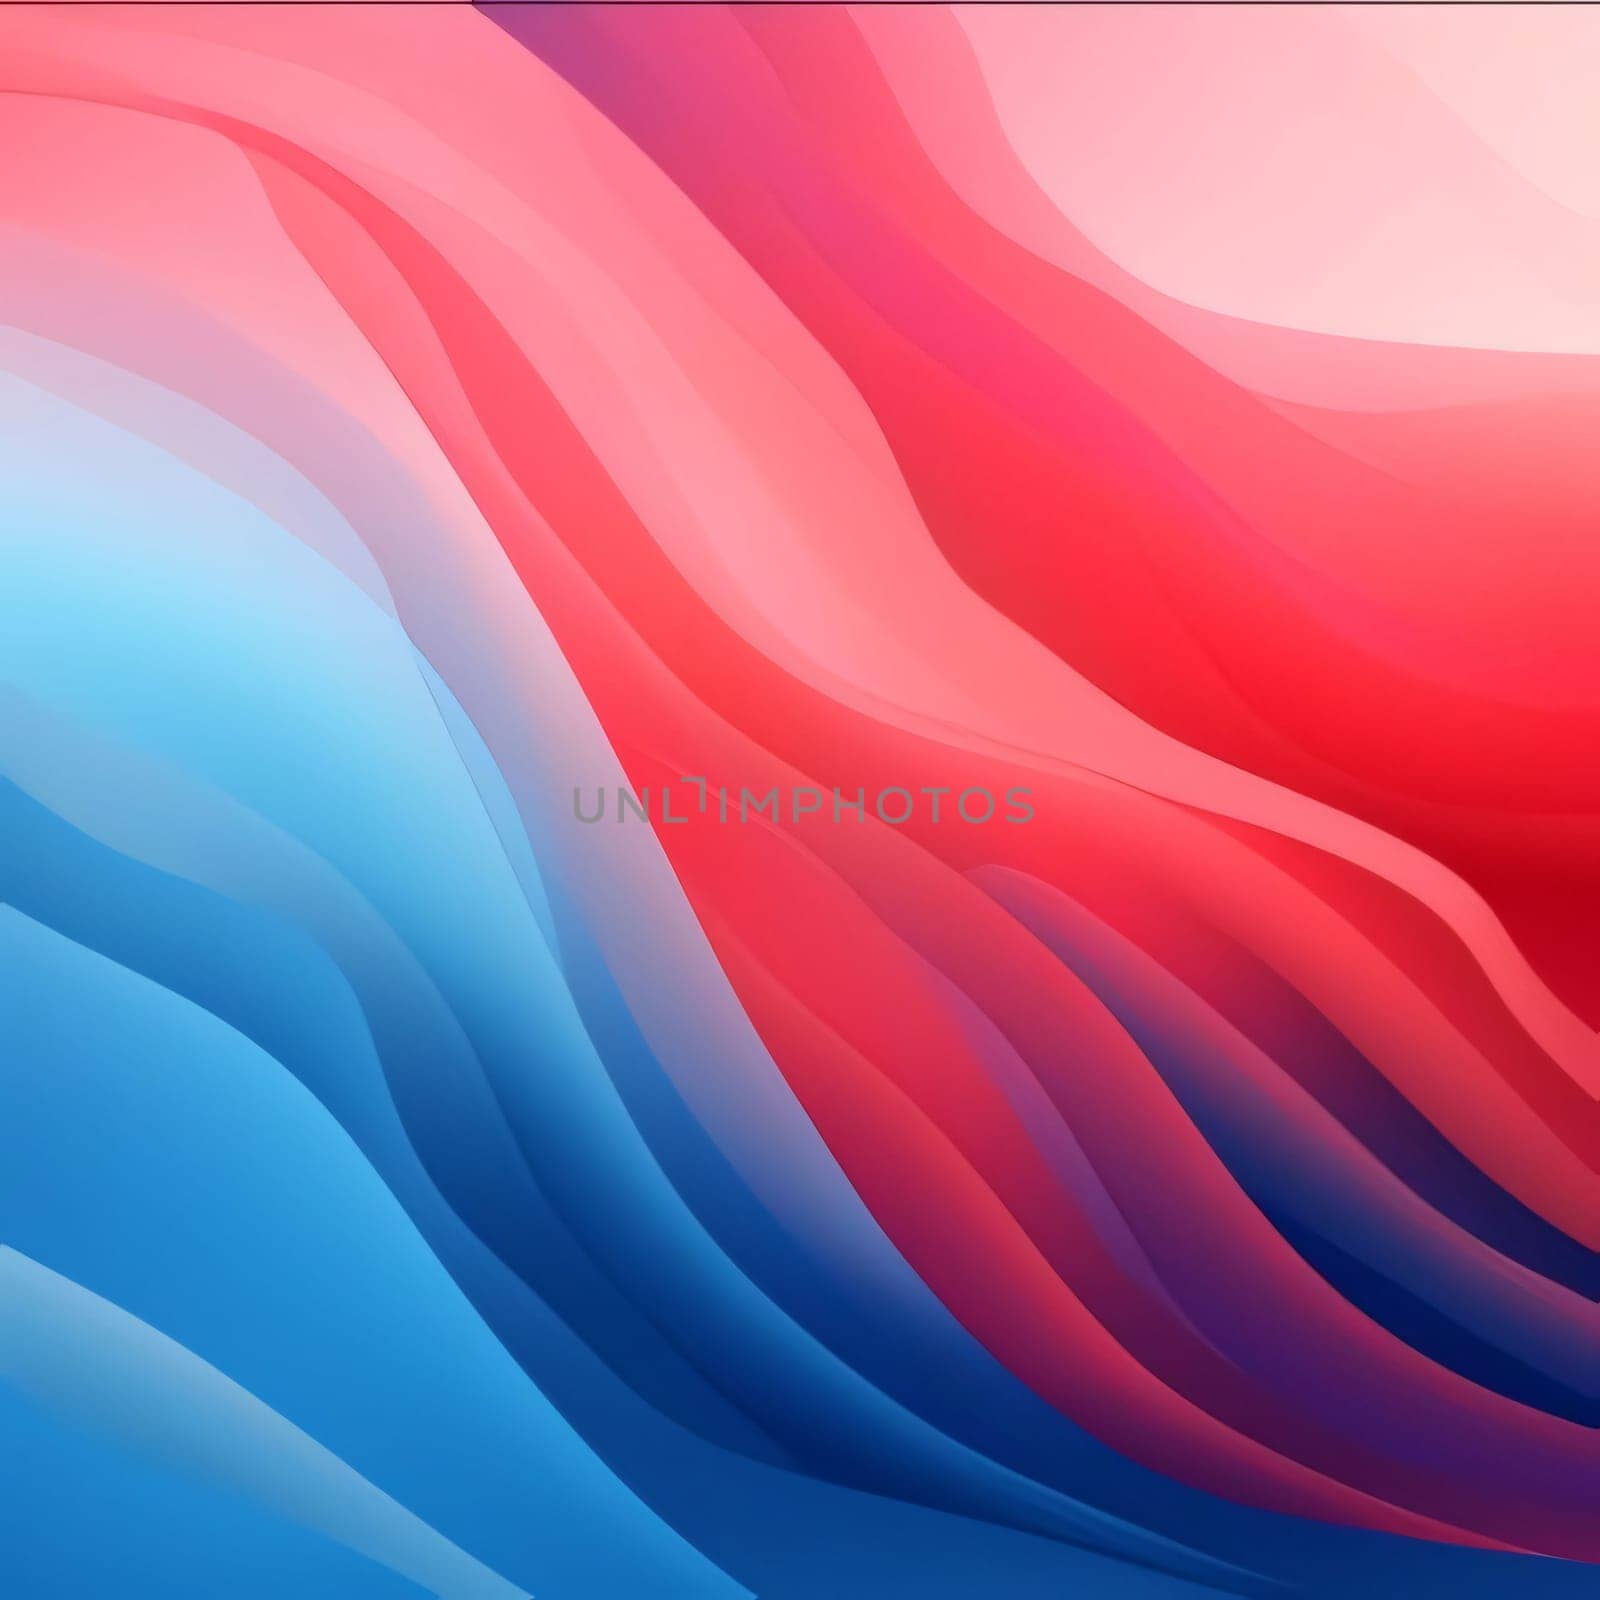 Abstract background design: abstract background with smooth lines in red, blue and pink colors